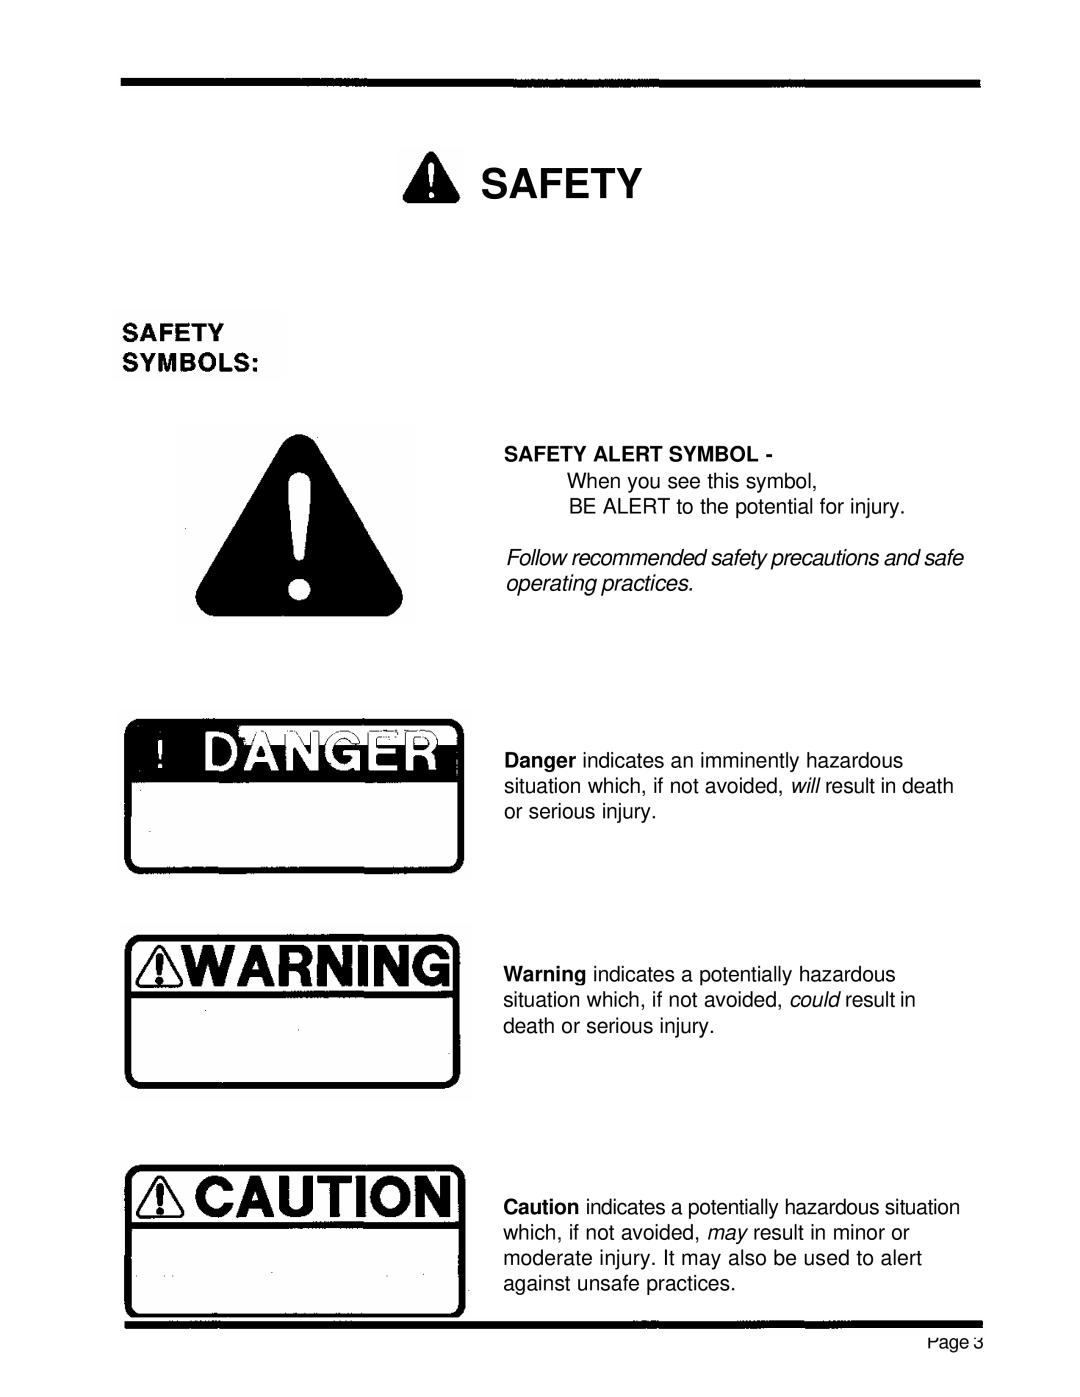 Dixon 5000 Series manual Follow recommended safety precautions and safe operating practices, Safety Alert Symbol 